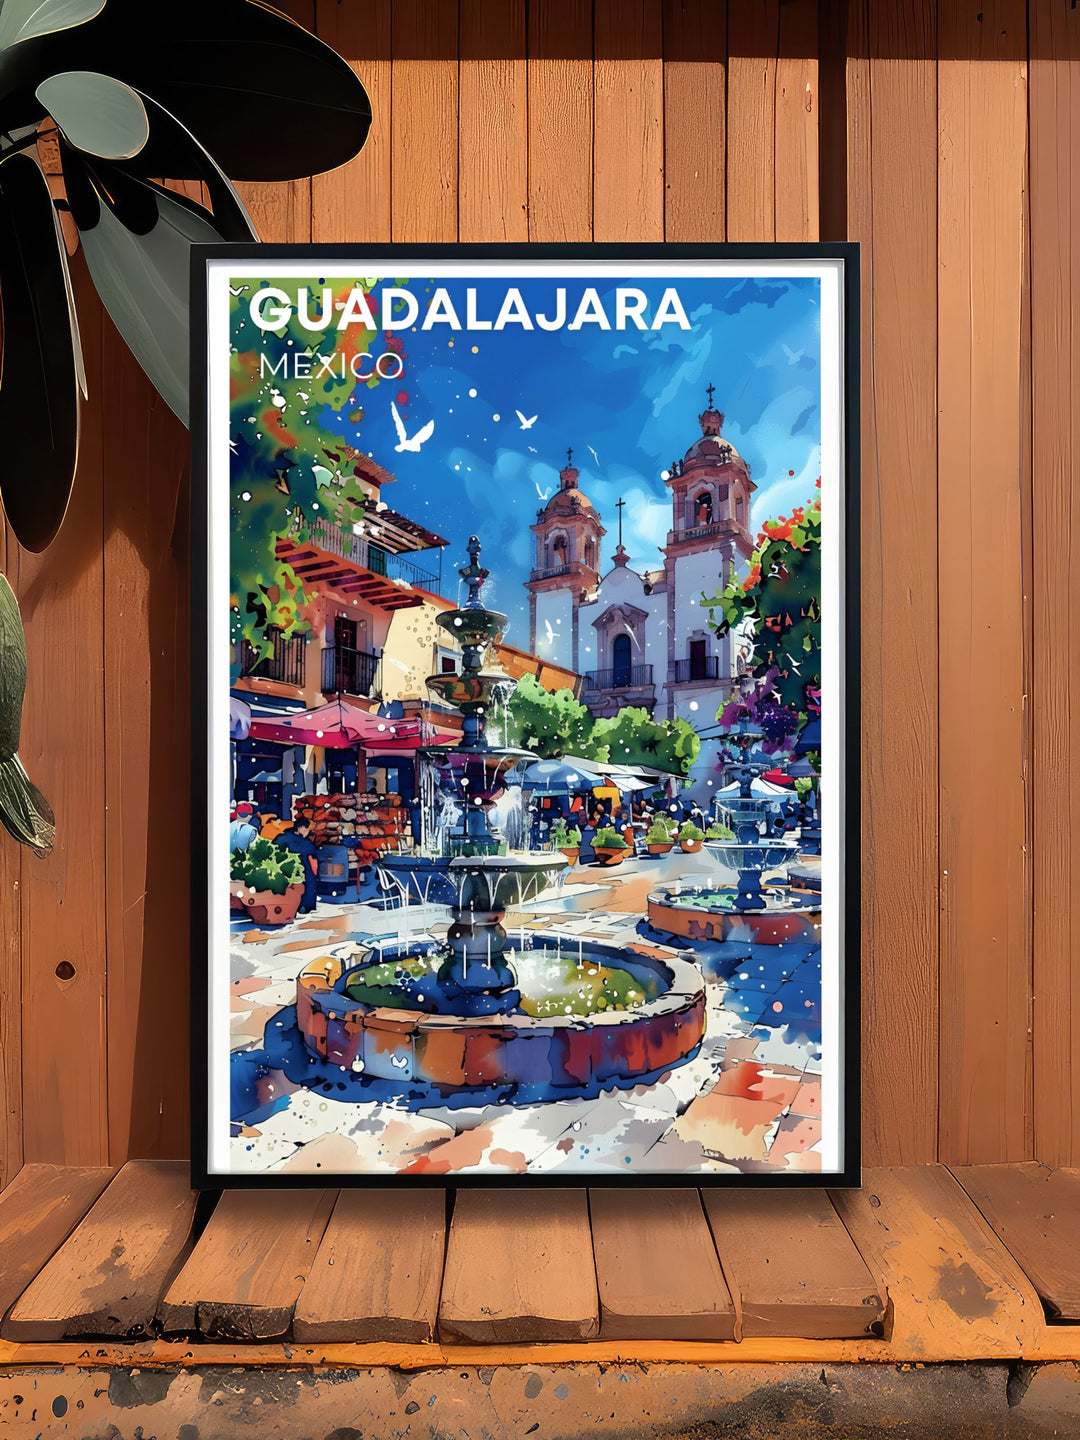 Featuring the bustling life and colorful art of Guadalajara, this travel poster captures the lively streets and vibrant energy of the city, ideal for enhancing any room.